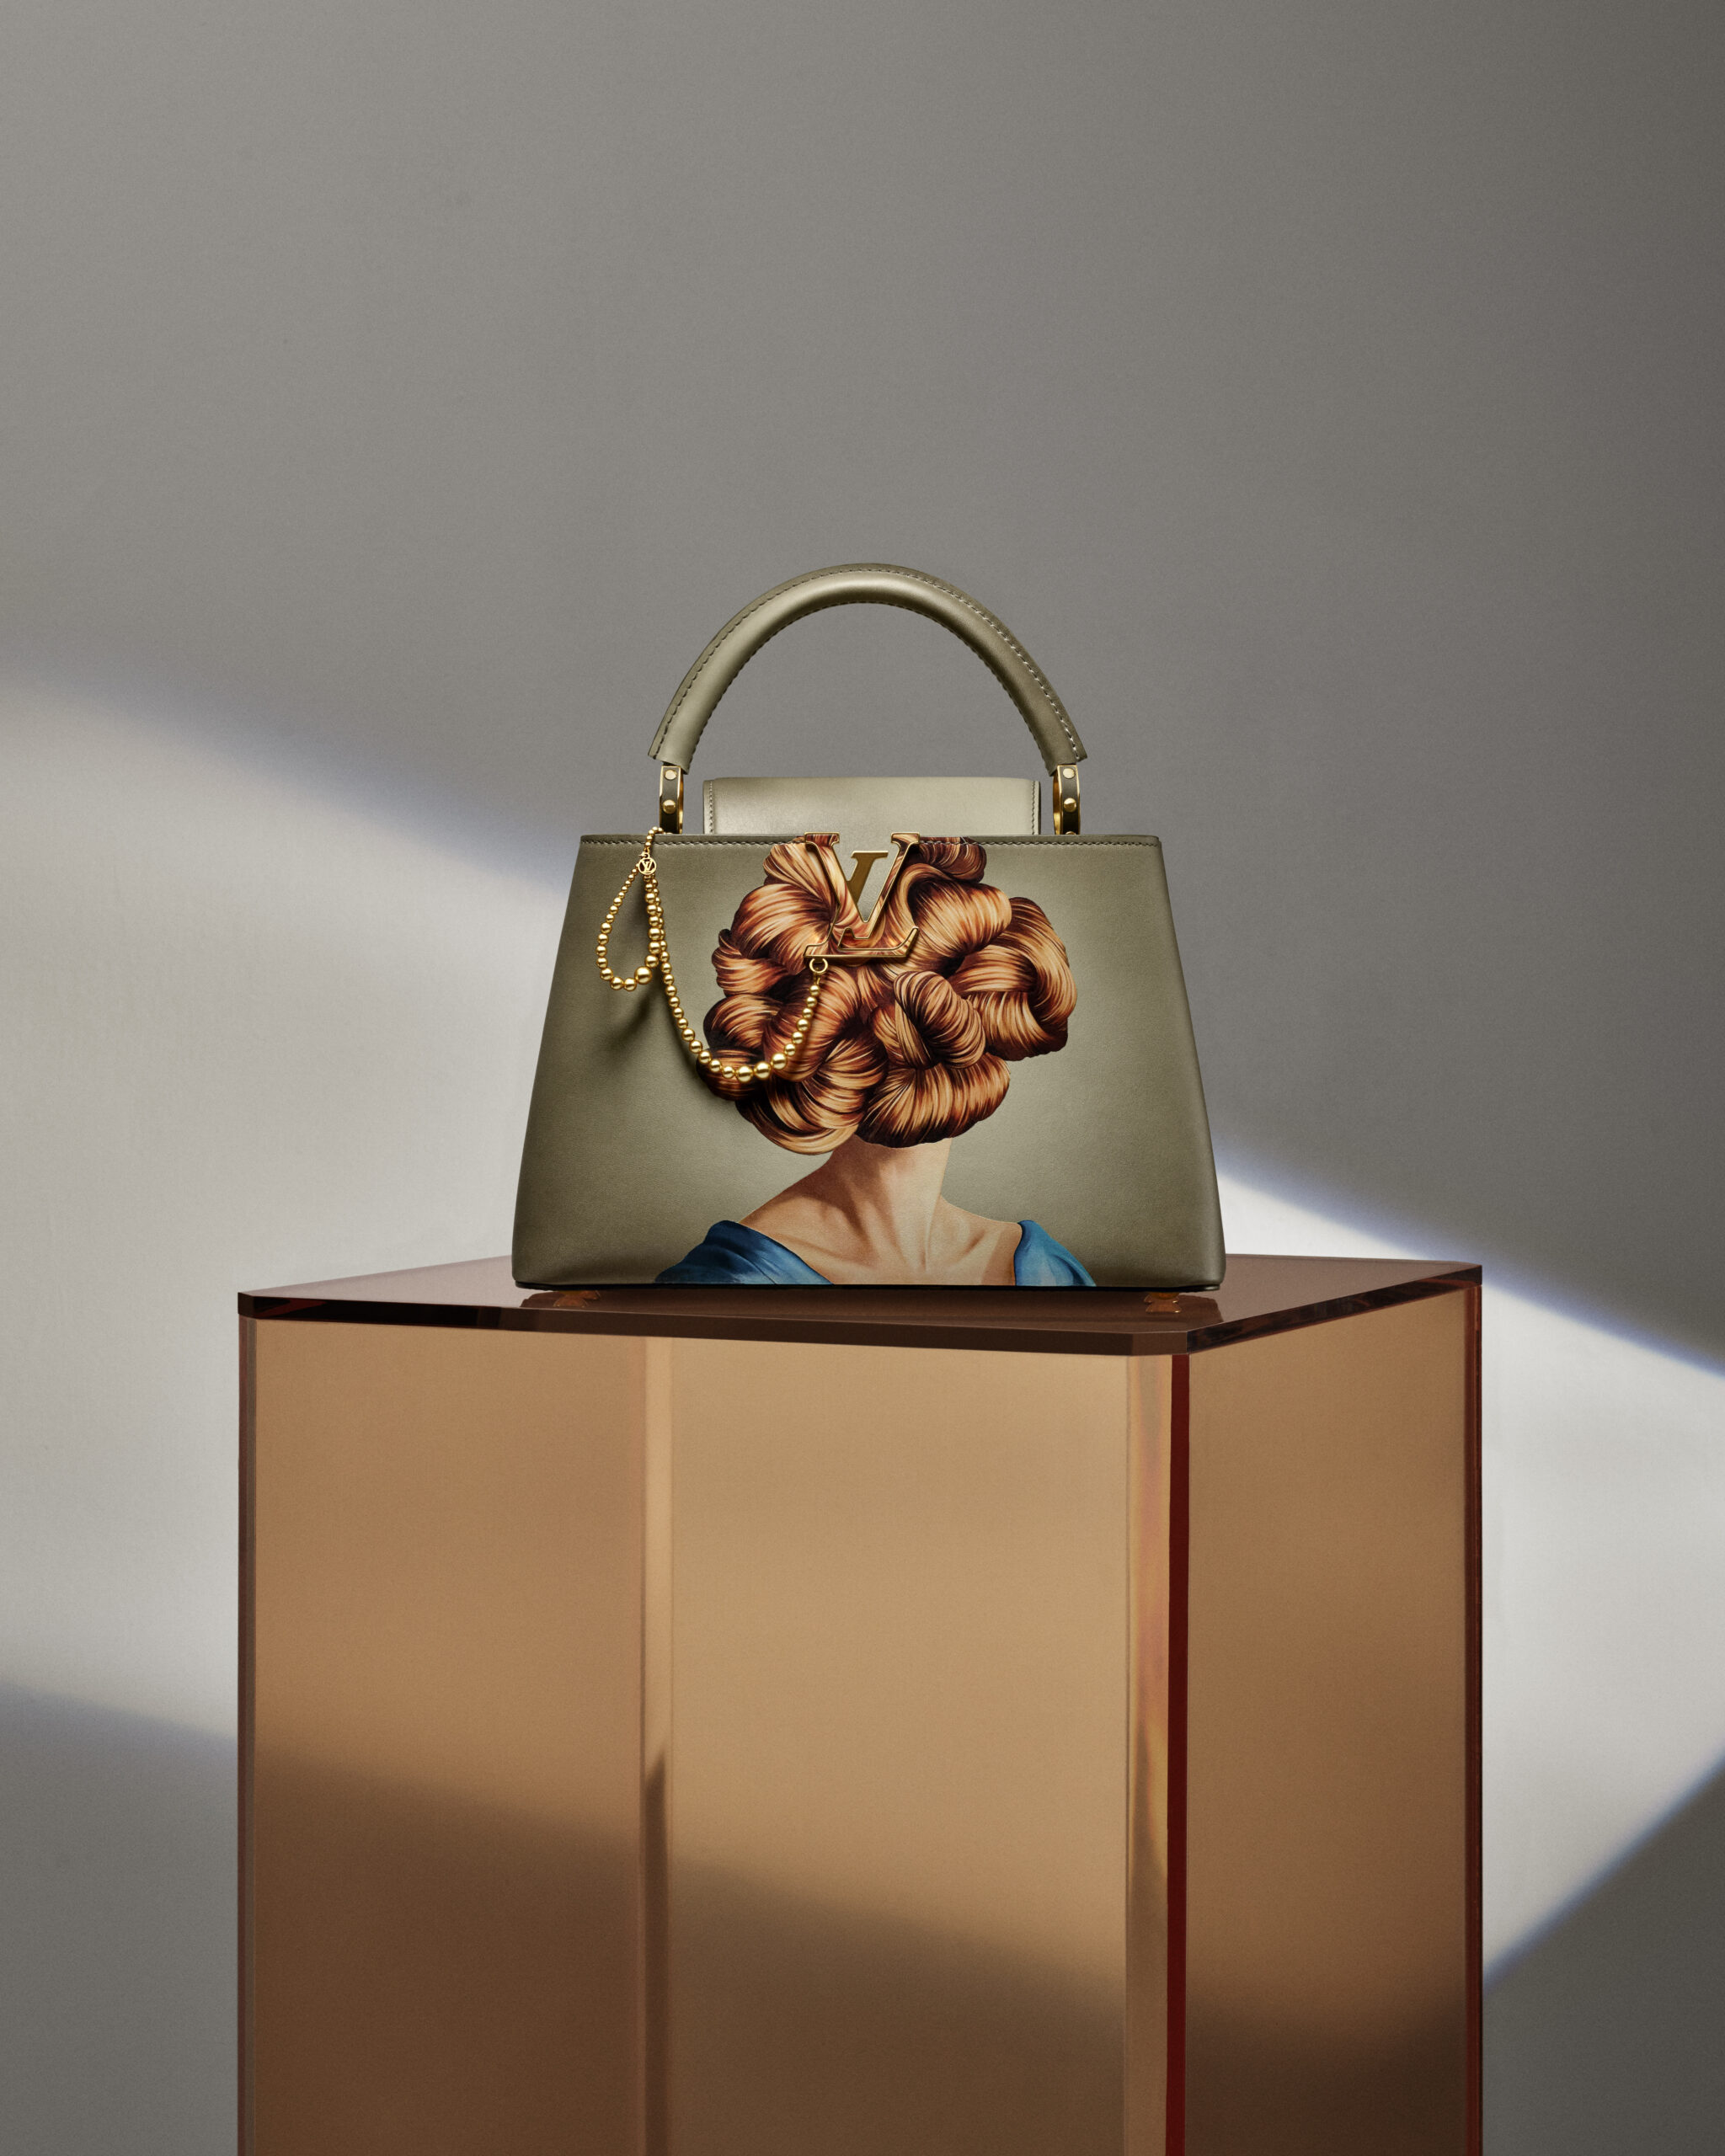 Louis Vuitton: Art Celebrates Fashion with the New 'Artycapucines'  Collection - The Blonde Salad